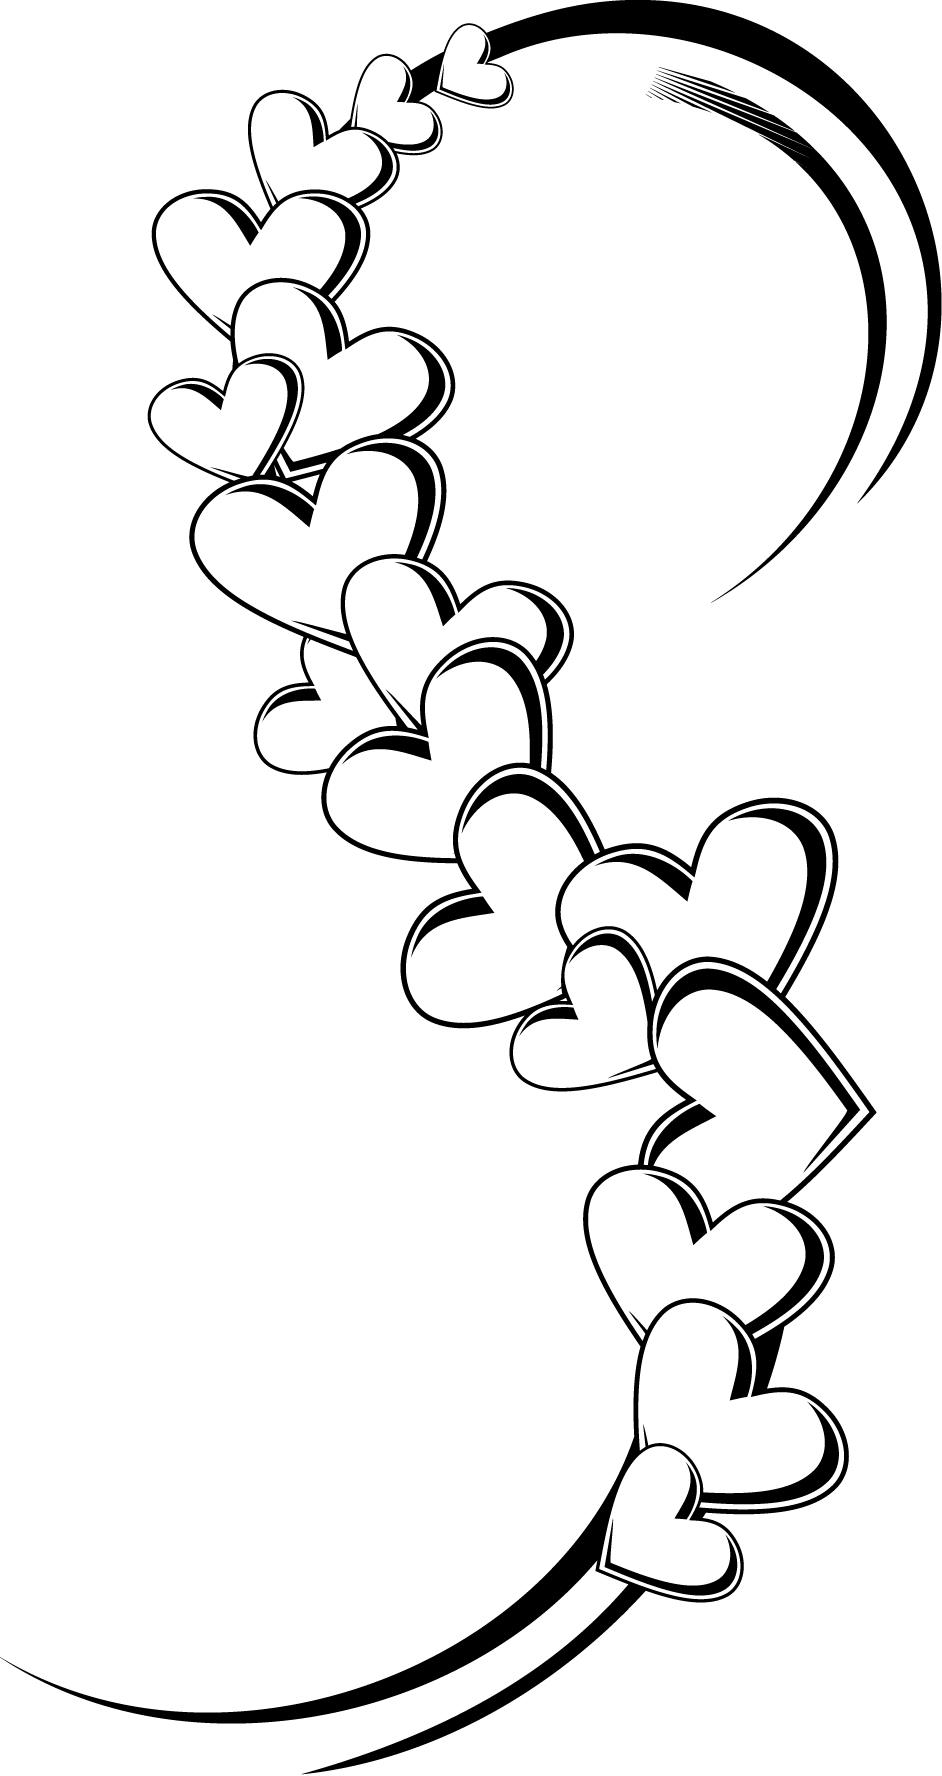 s letter design drawing - Clip Art Library